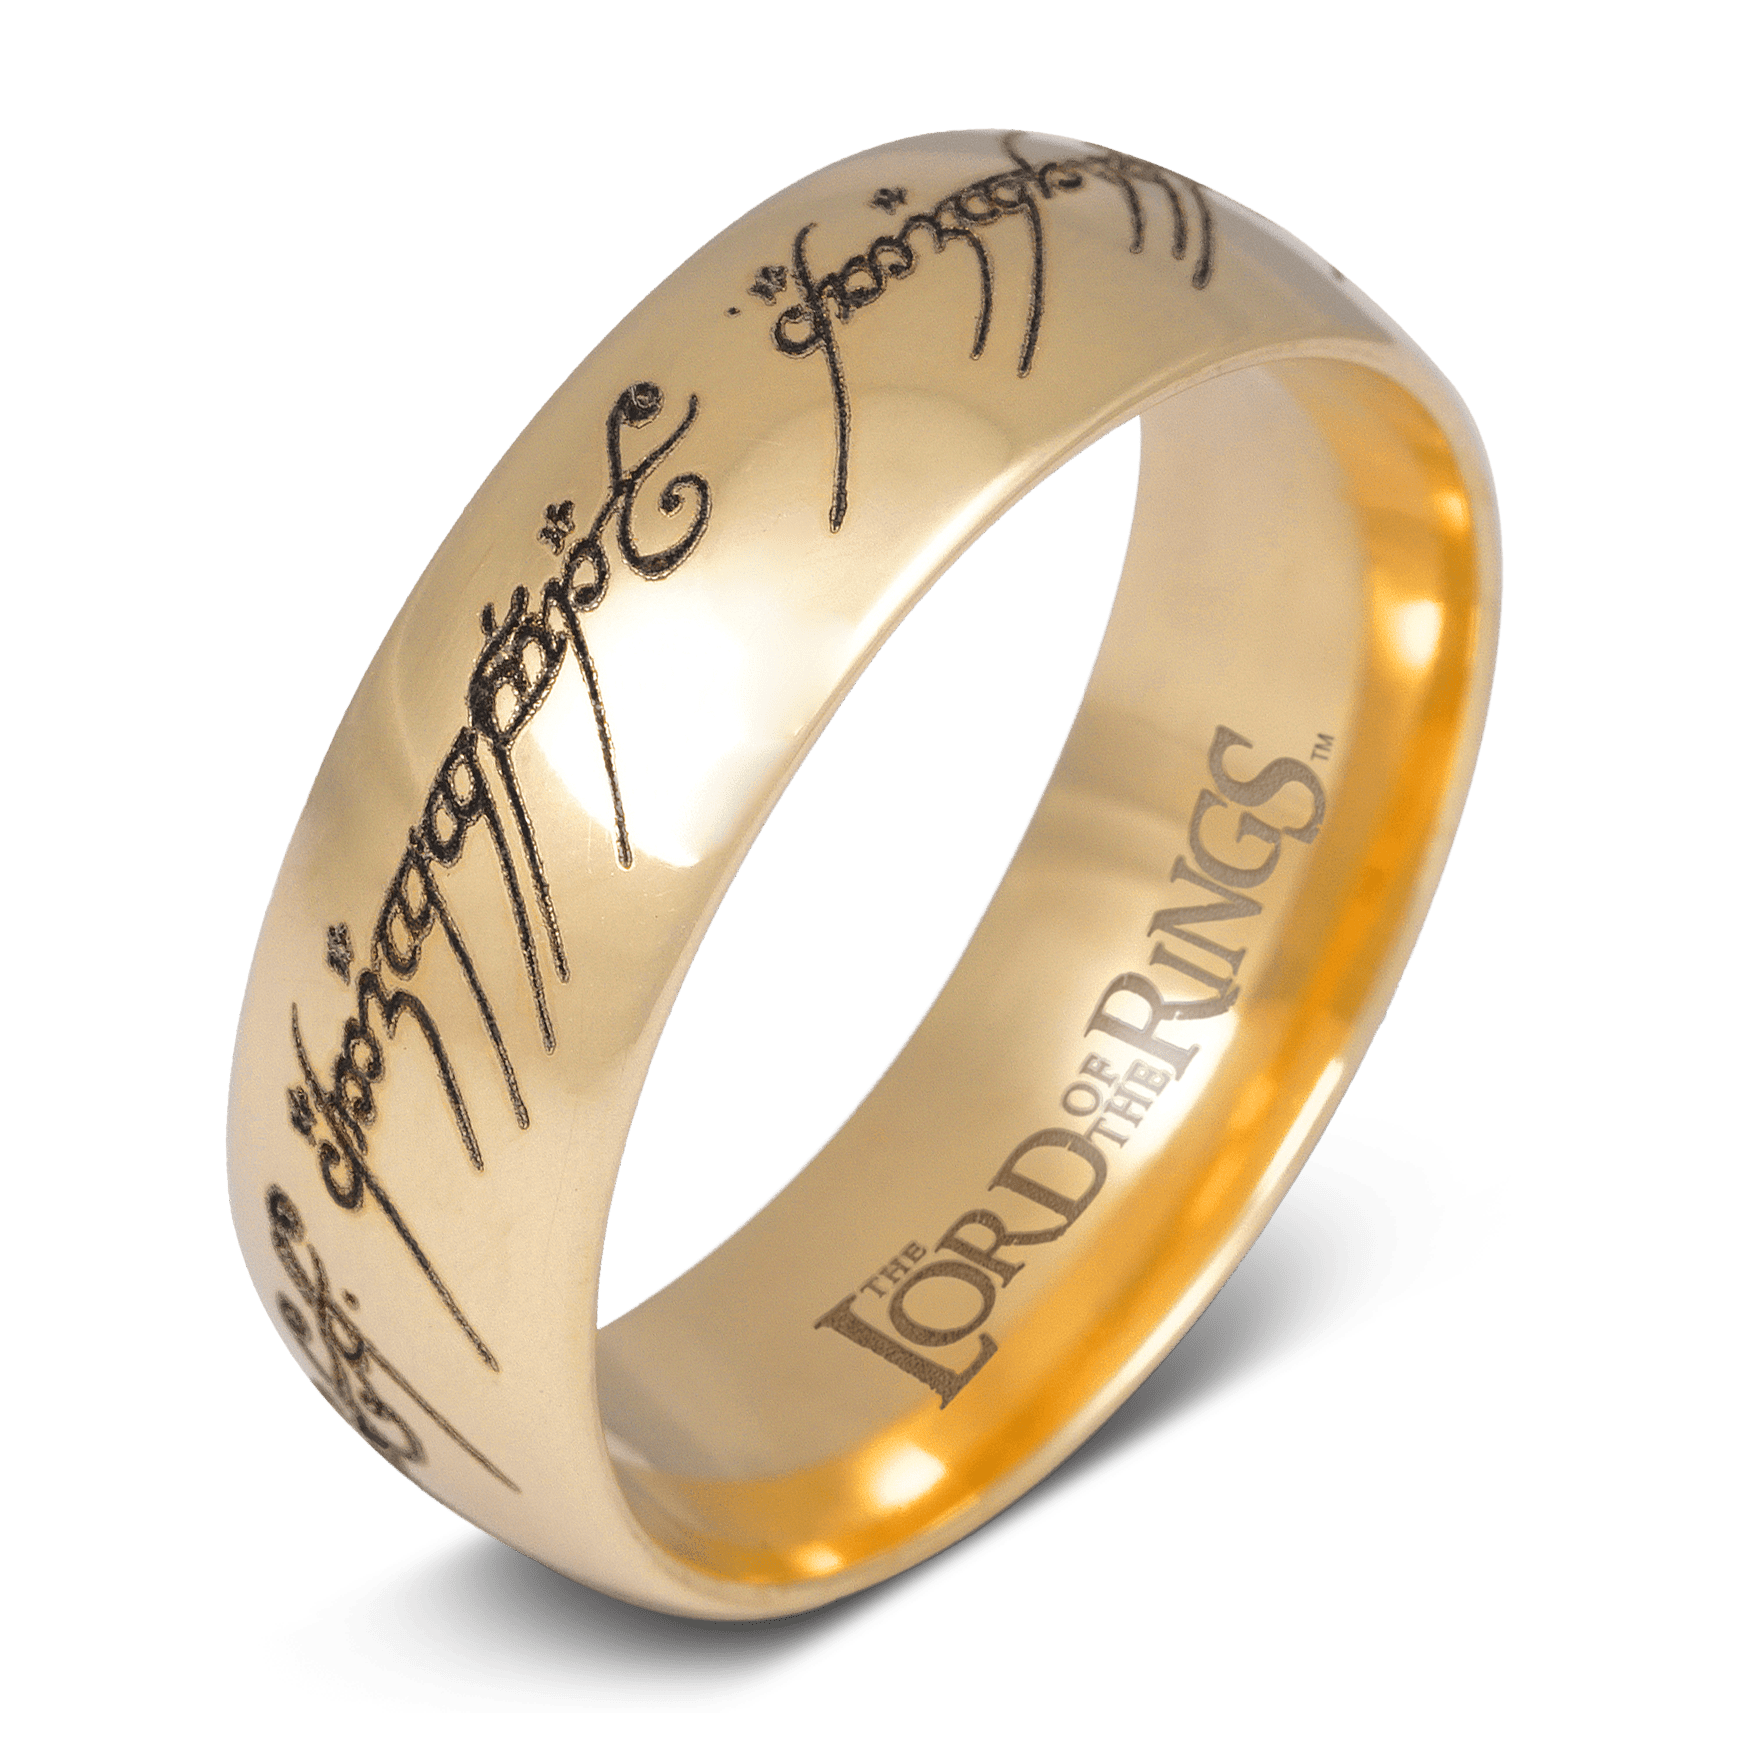 My Precious? Review of The Lord of the Rings: The Rings of Power